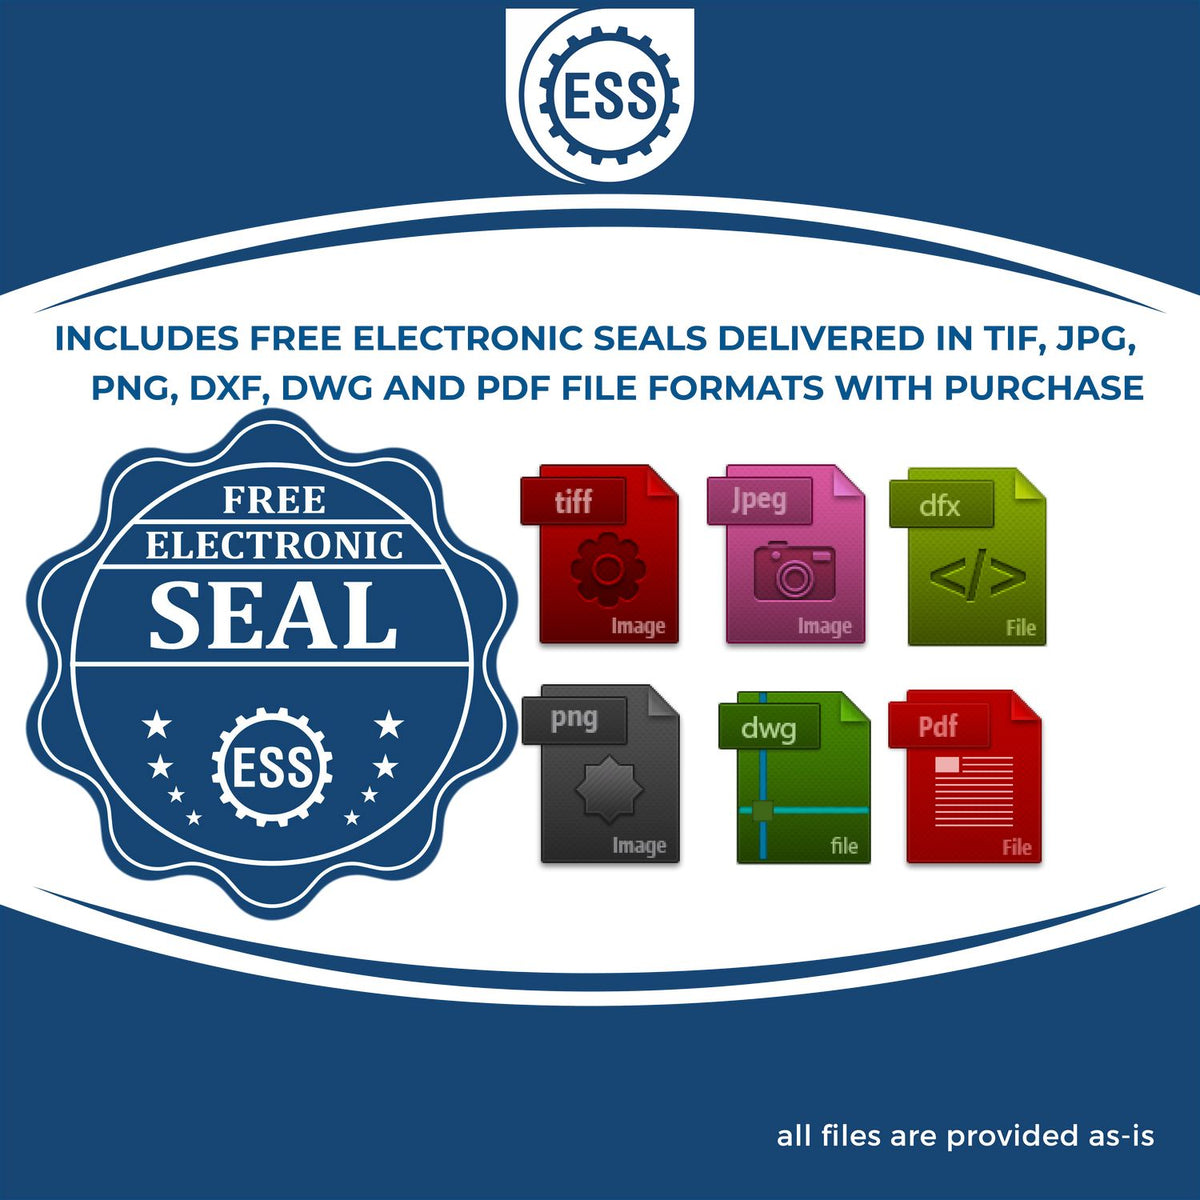 An infographic for the free electronic seal for the Handheld Kentucky Land Surveyor Seal illustrating the different file type icons such as DXF, DWG, TIF, JPG and PNG.